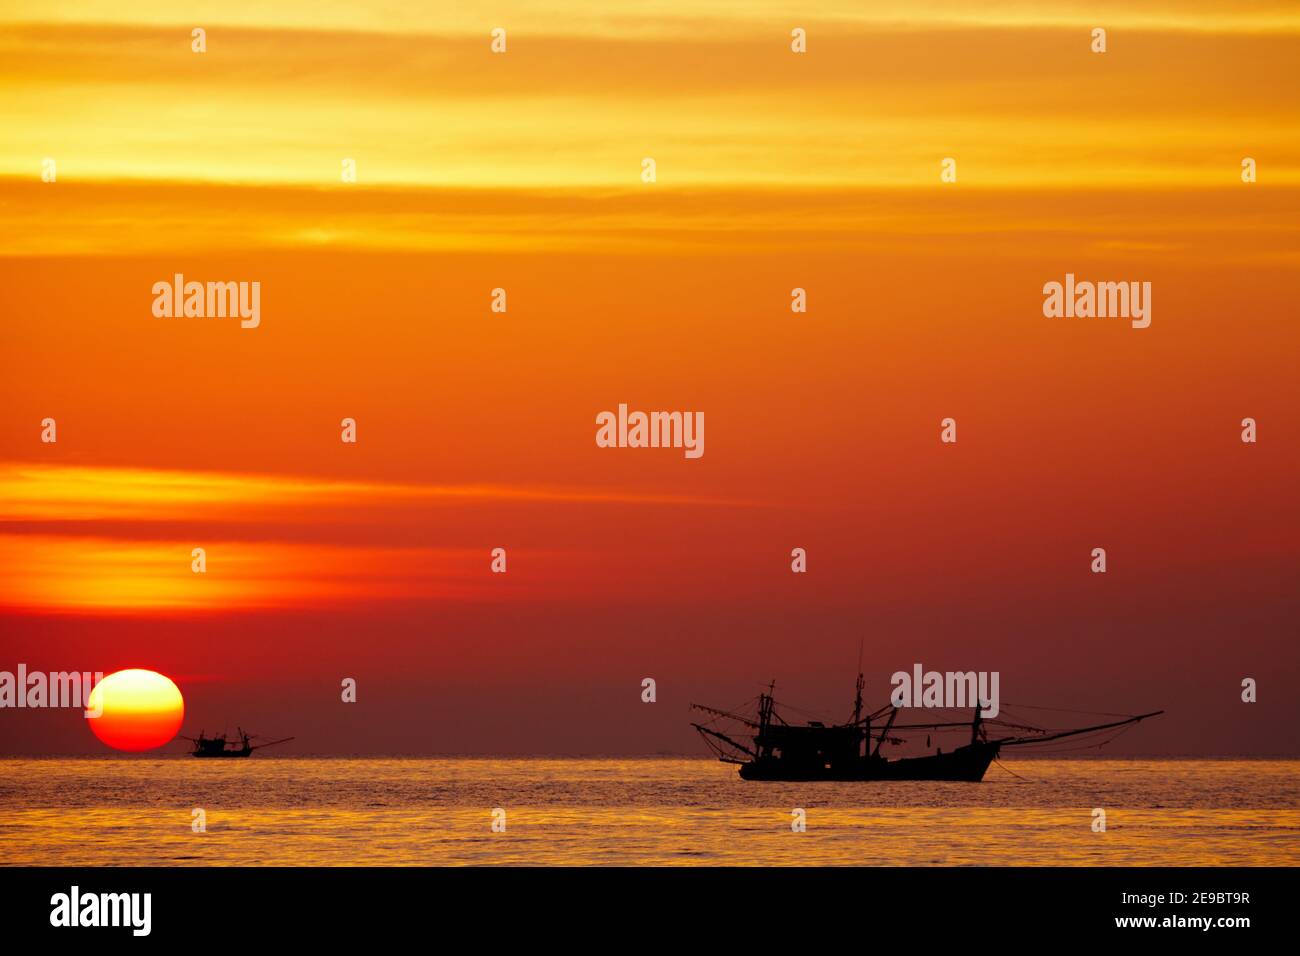 Seascape with fishing boats at sunset, Chang island, Thailand Stock Photo